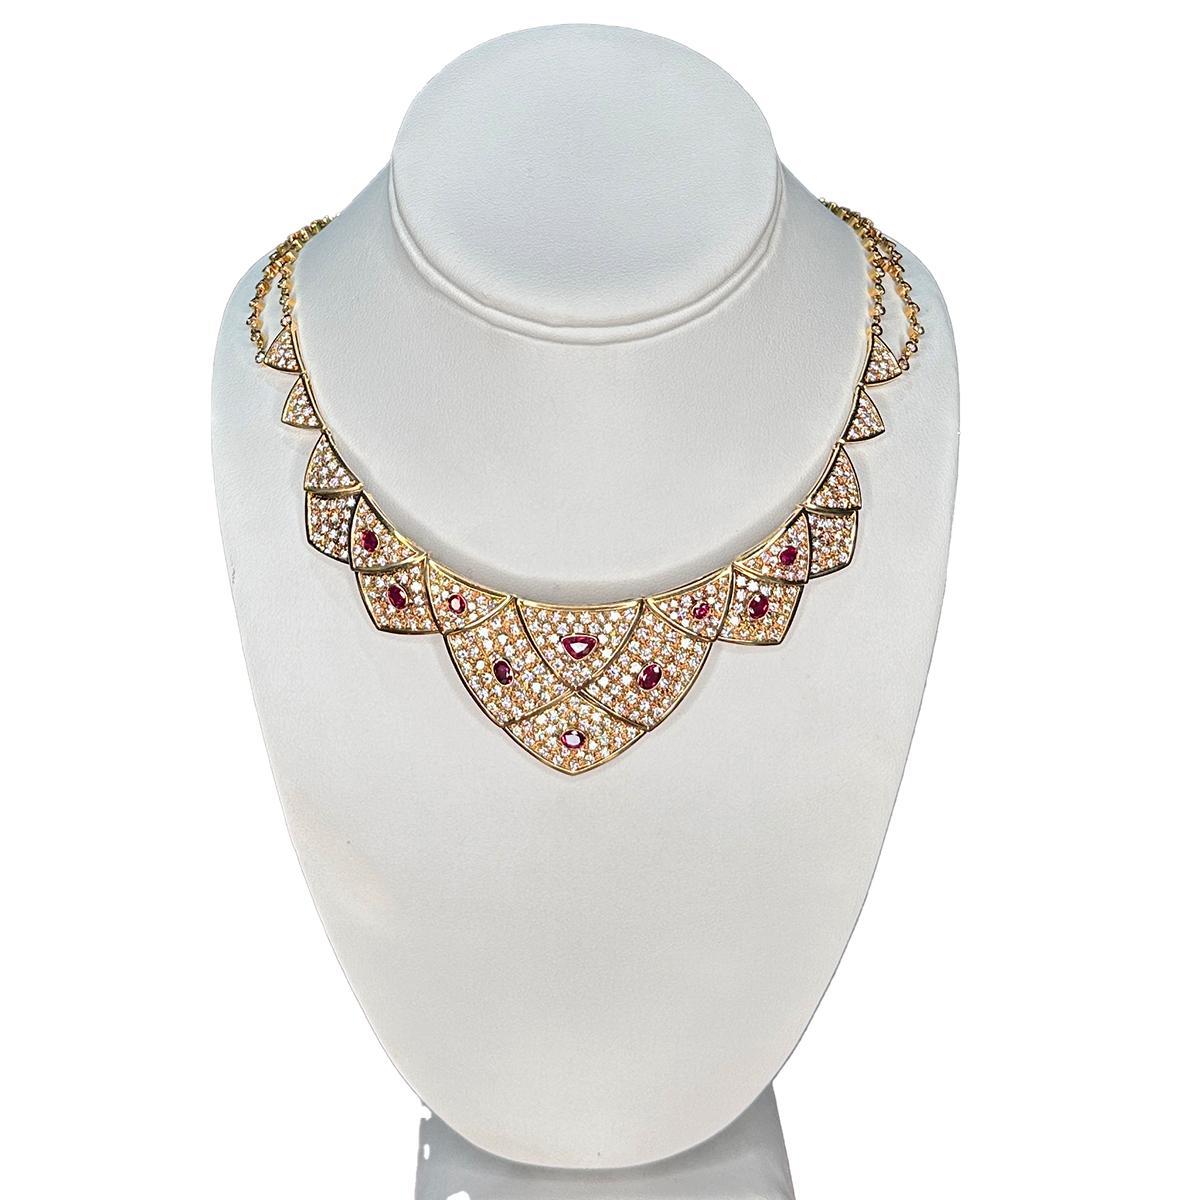 18k Necklace & Bracelet Suite with approximately 17.00 carats of fine diamonds and 7.50 carats of fine rubies.